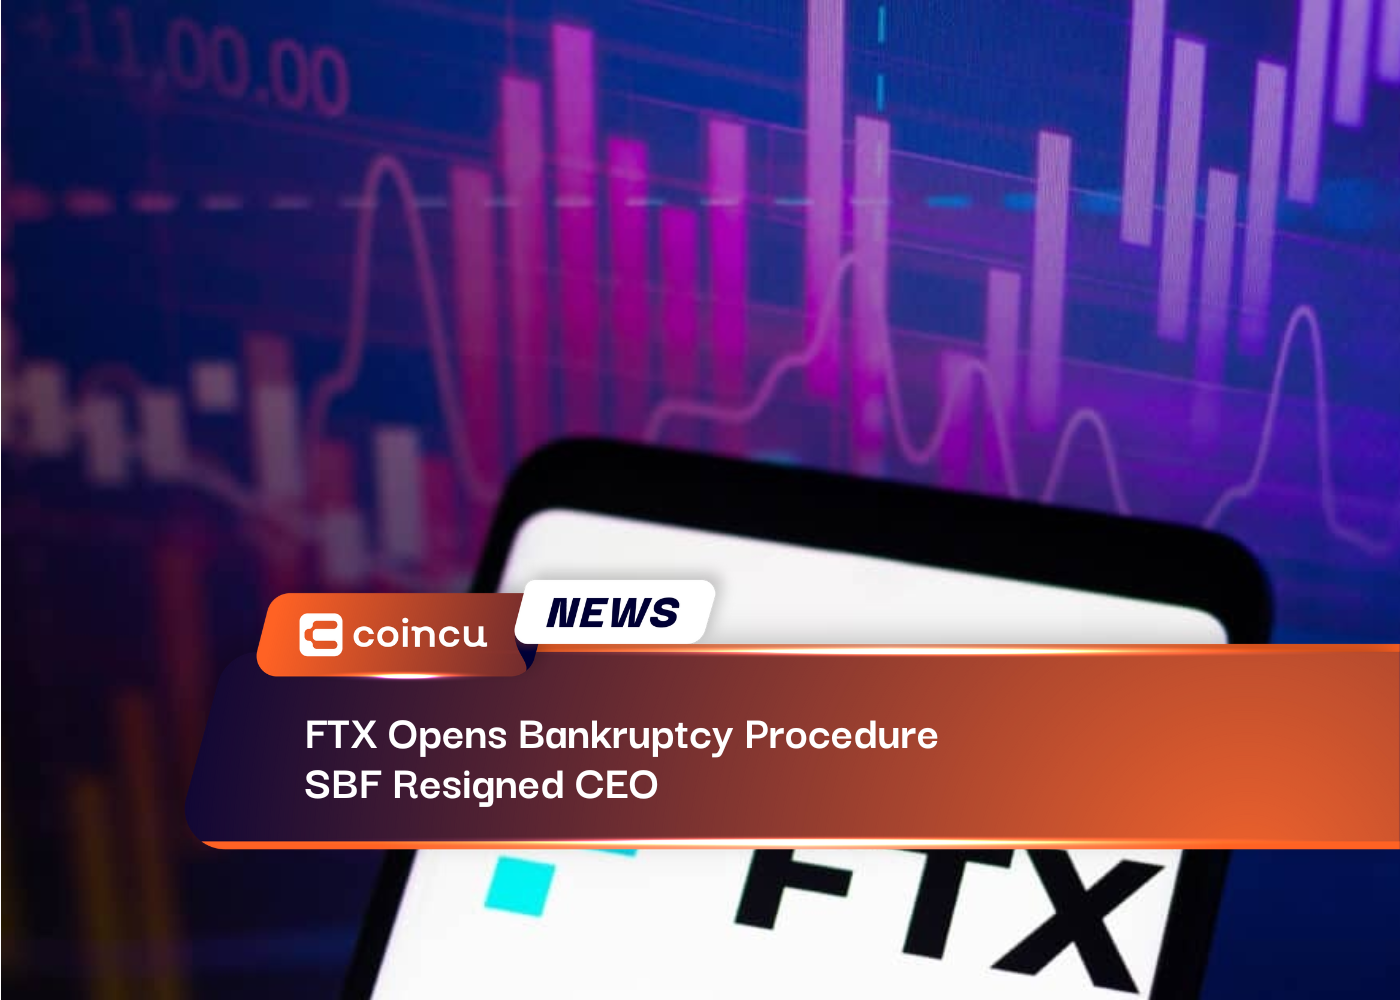 FTX Opens Bankruptcy Procedure, SBF Resigned CEO